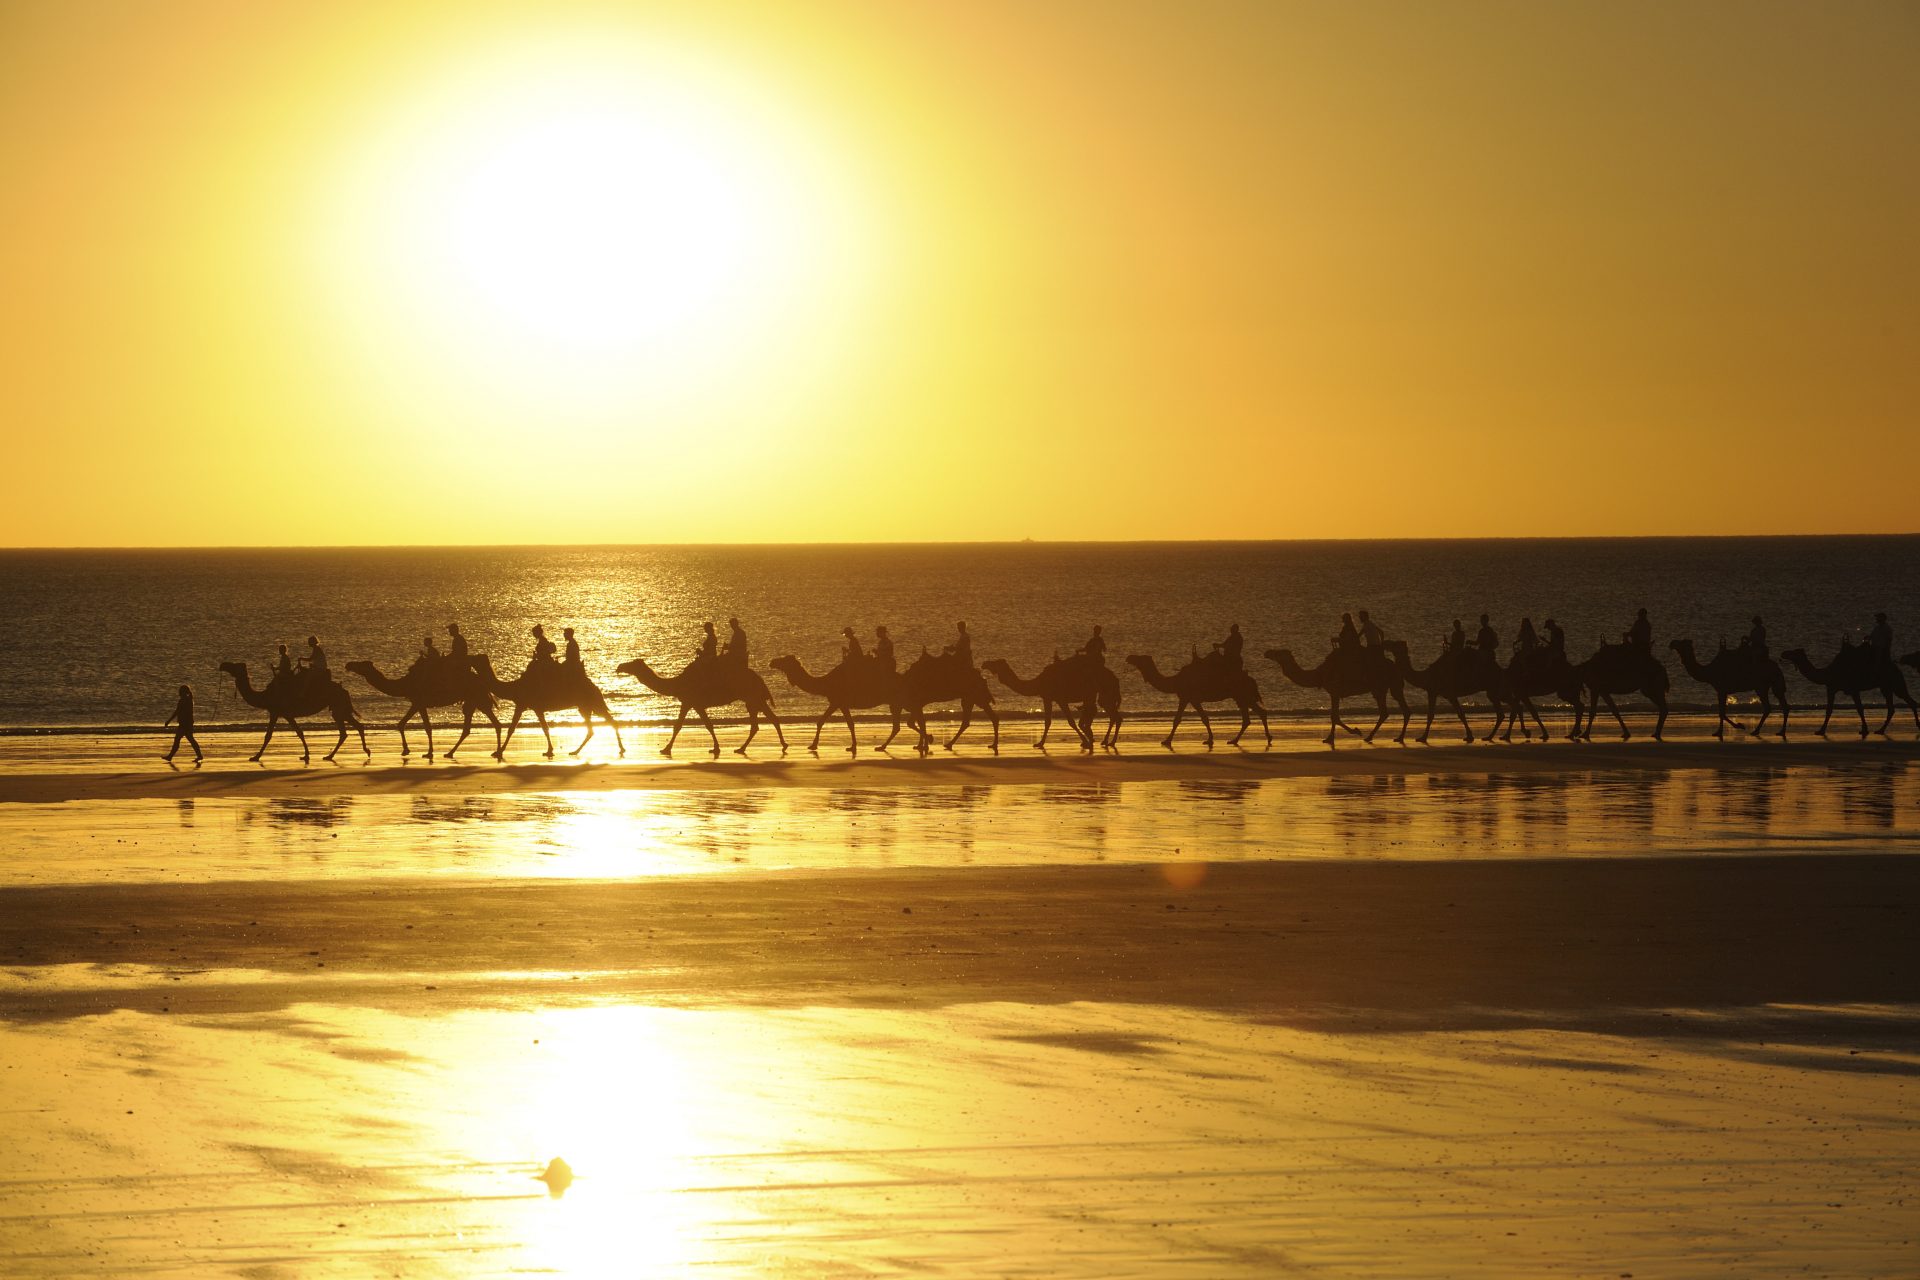 3rd place: Cable Beach - Broome, Australia